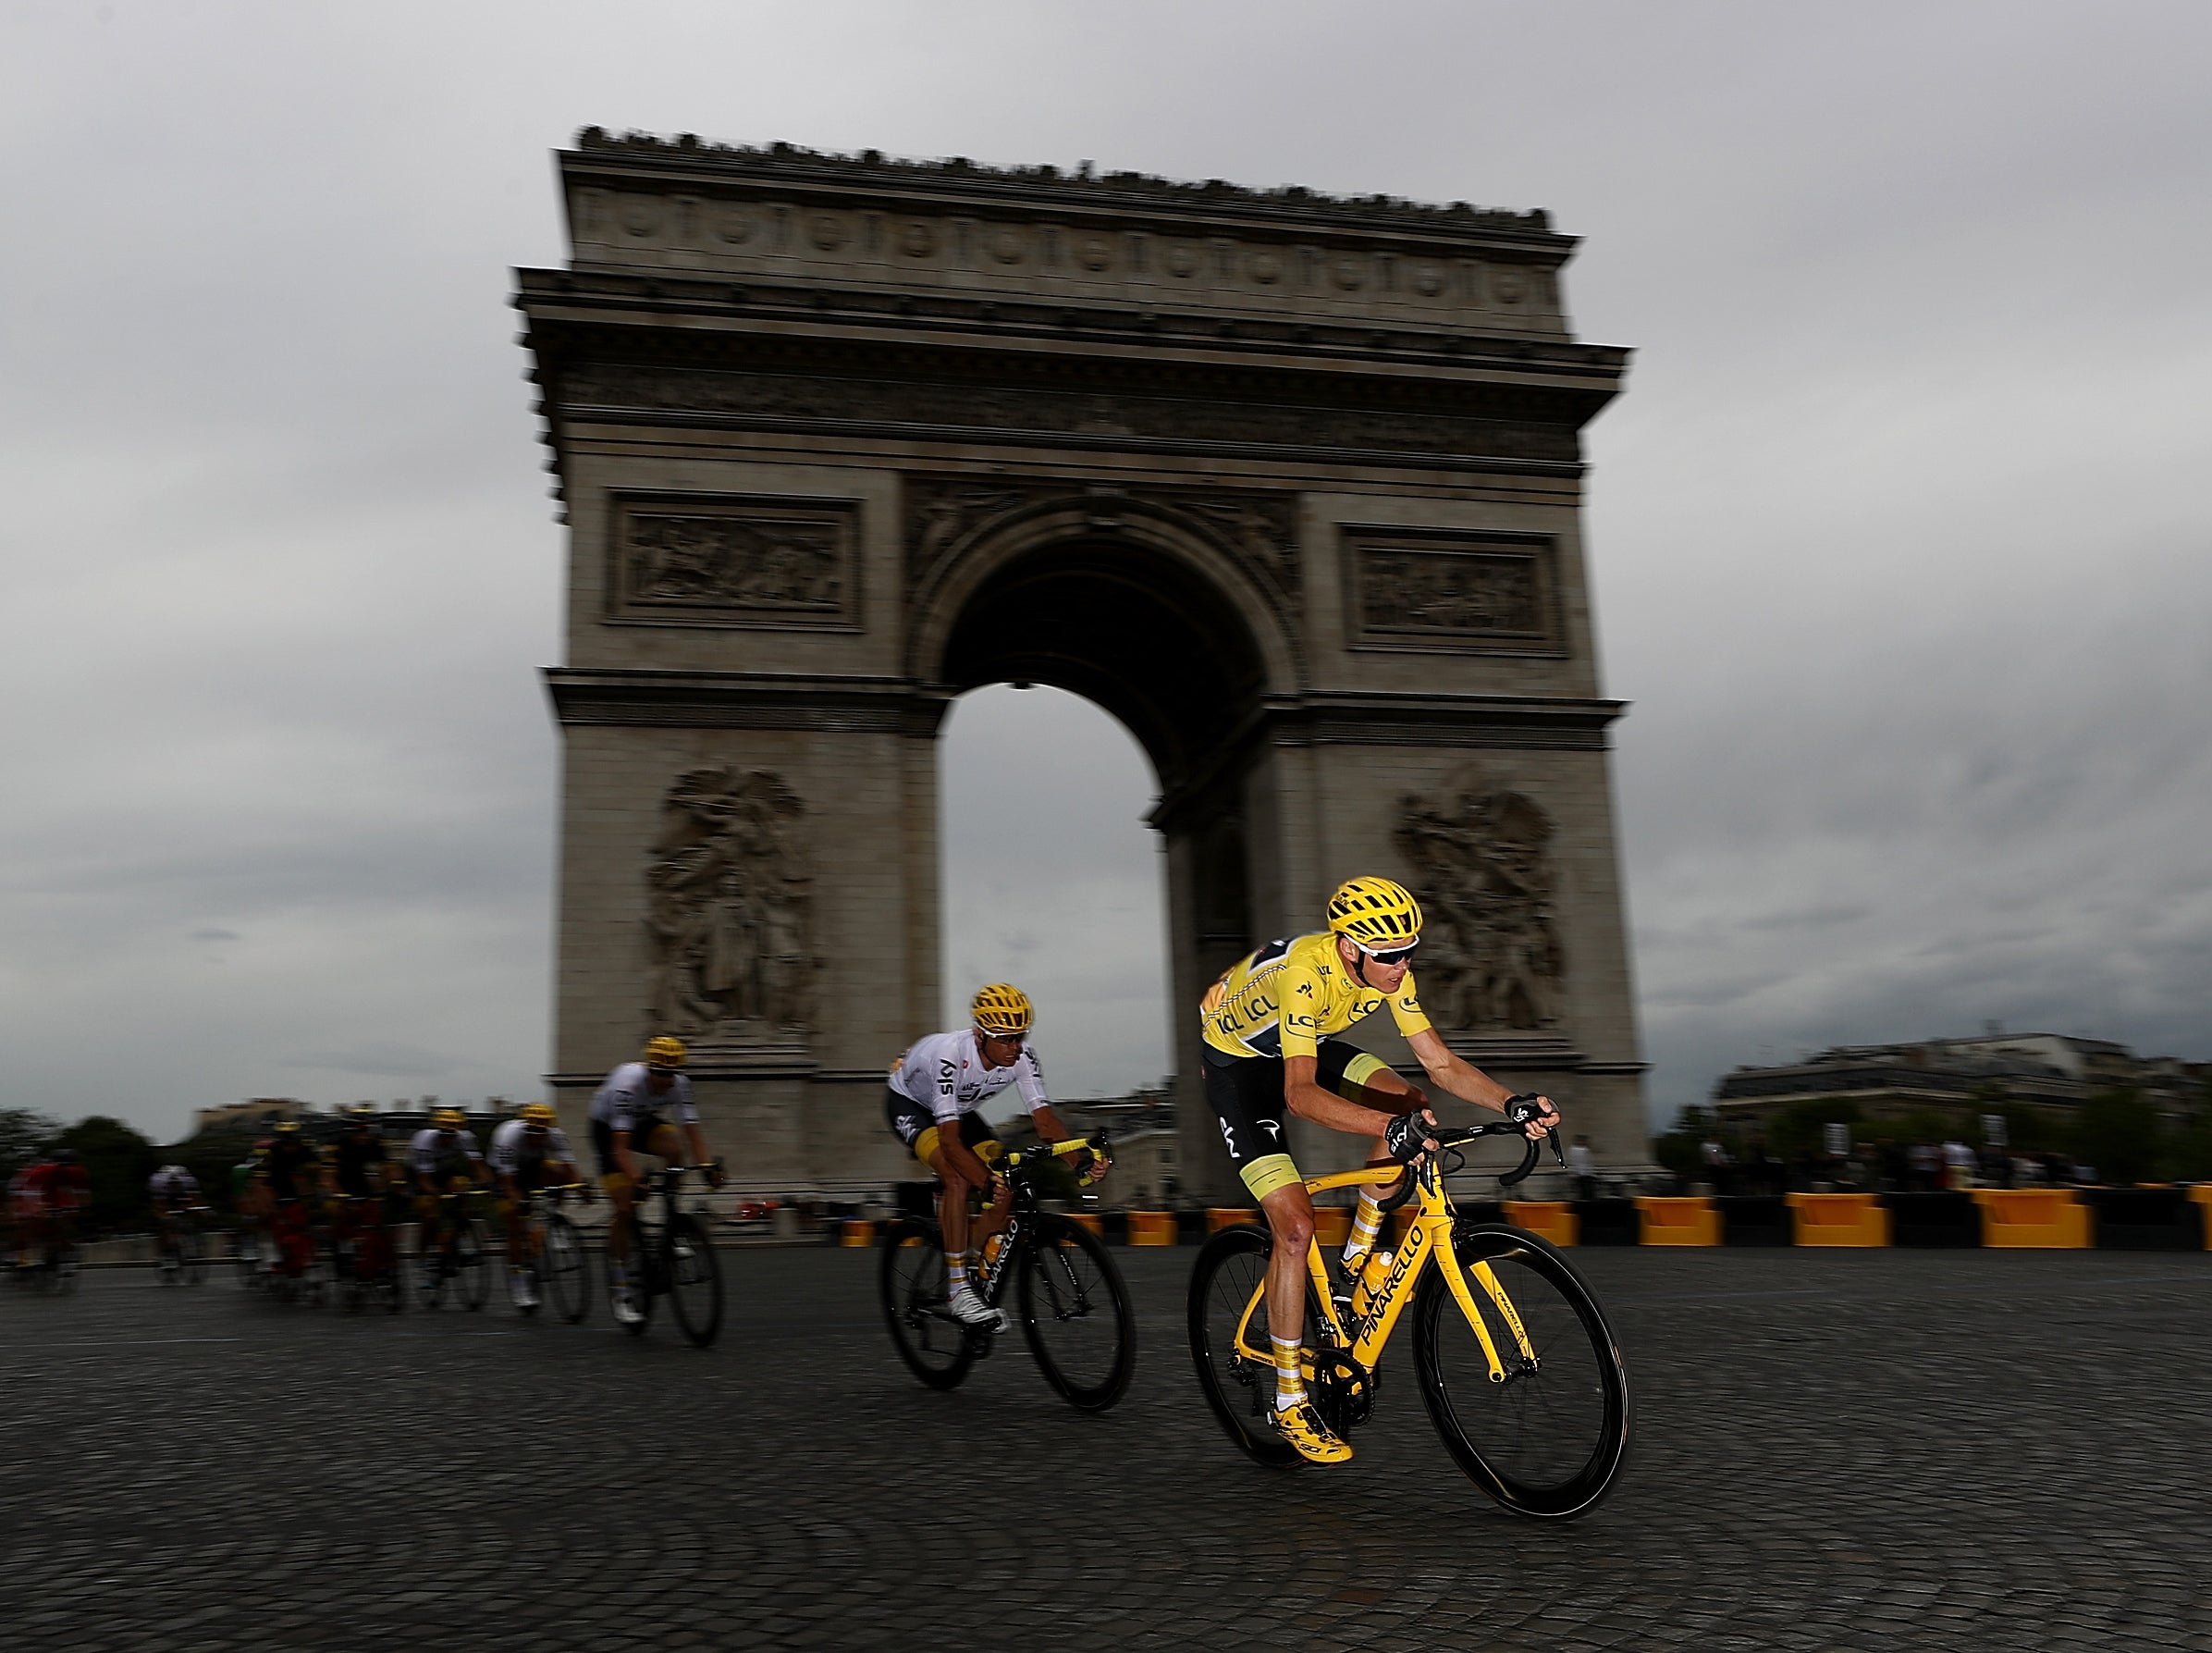 Froome cycling past the Champs-Élysées